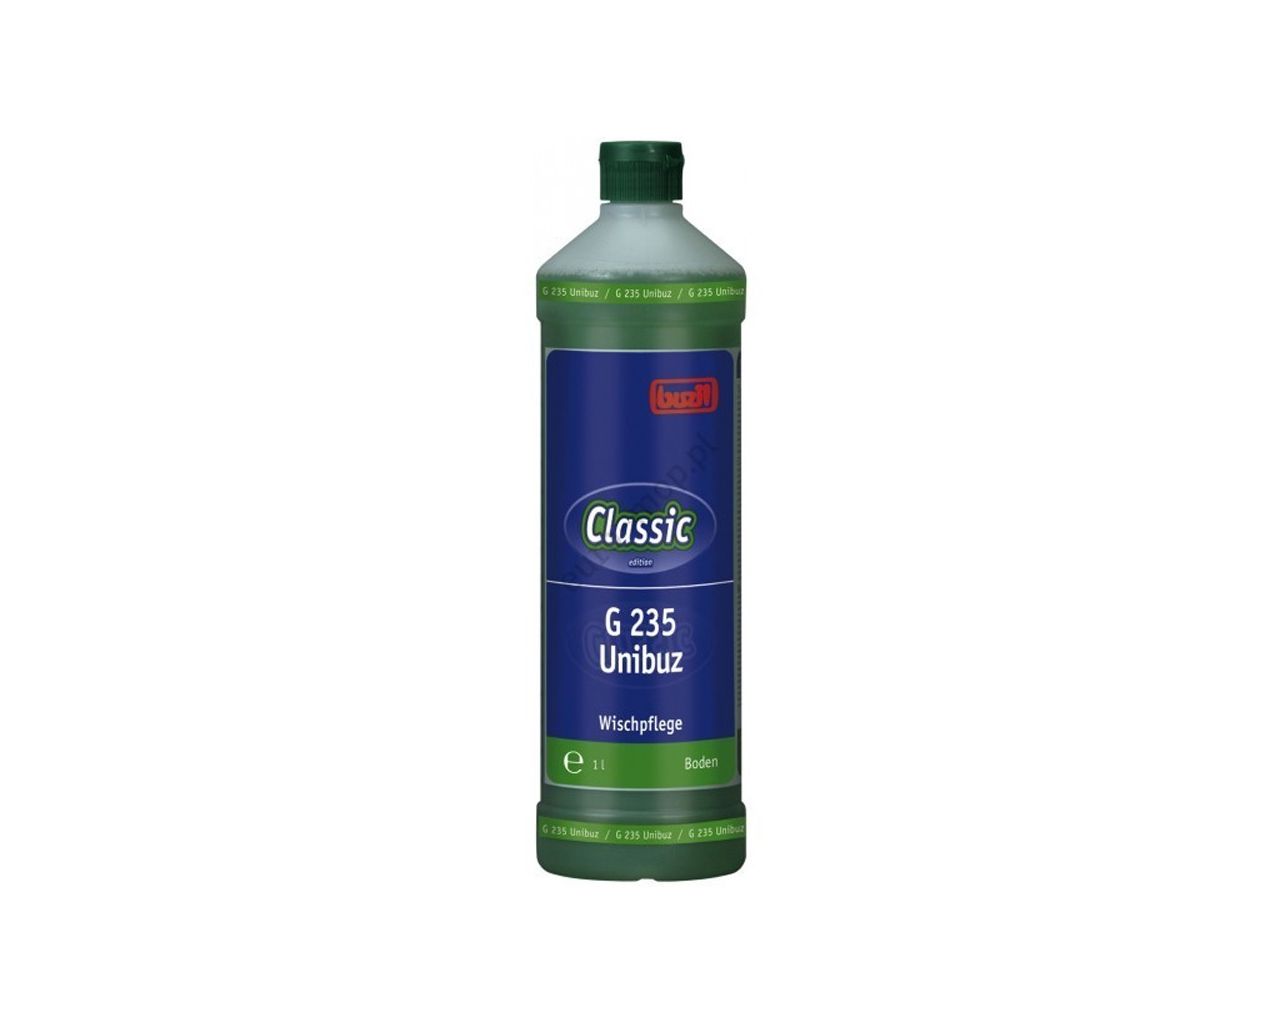 G235 Unibuz - cleaning fluid based on water-soluble polymers for routine cleaning of water-resistant floors, 1l